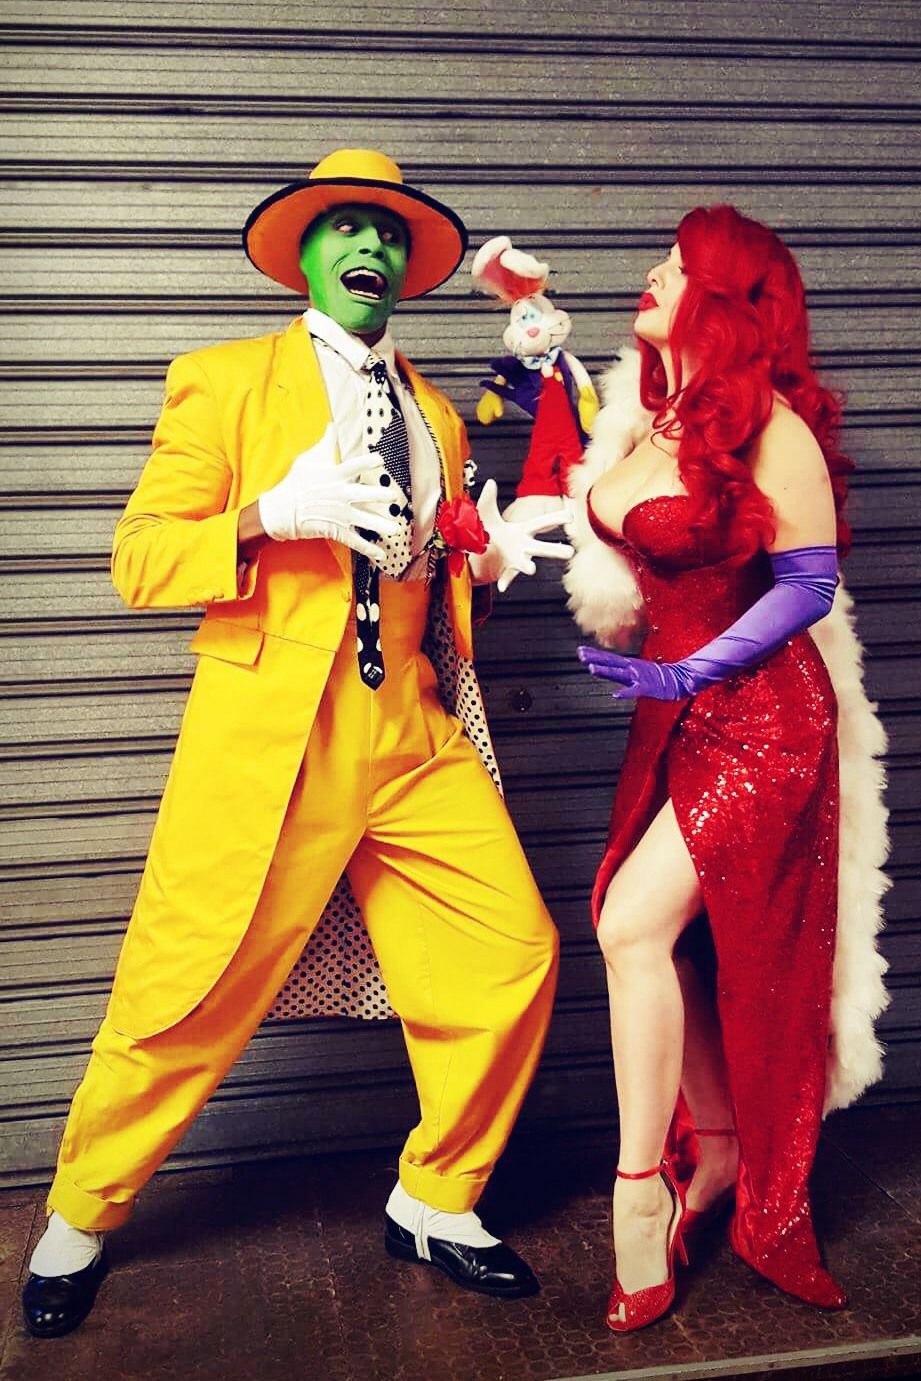 Jessica Rabbit song with roger rabbit and mask character 